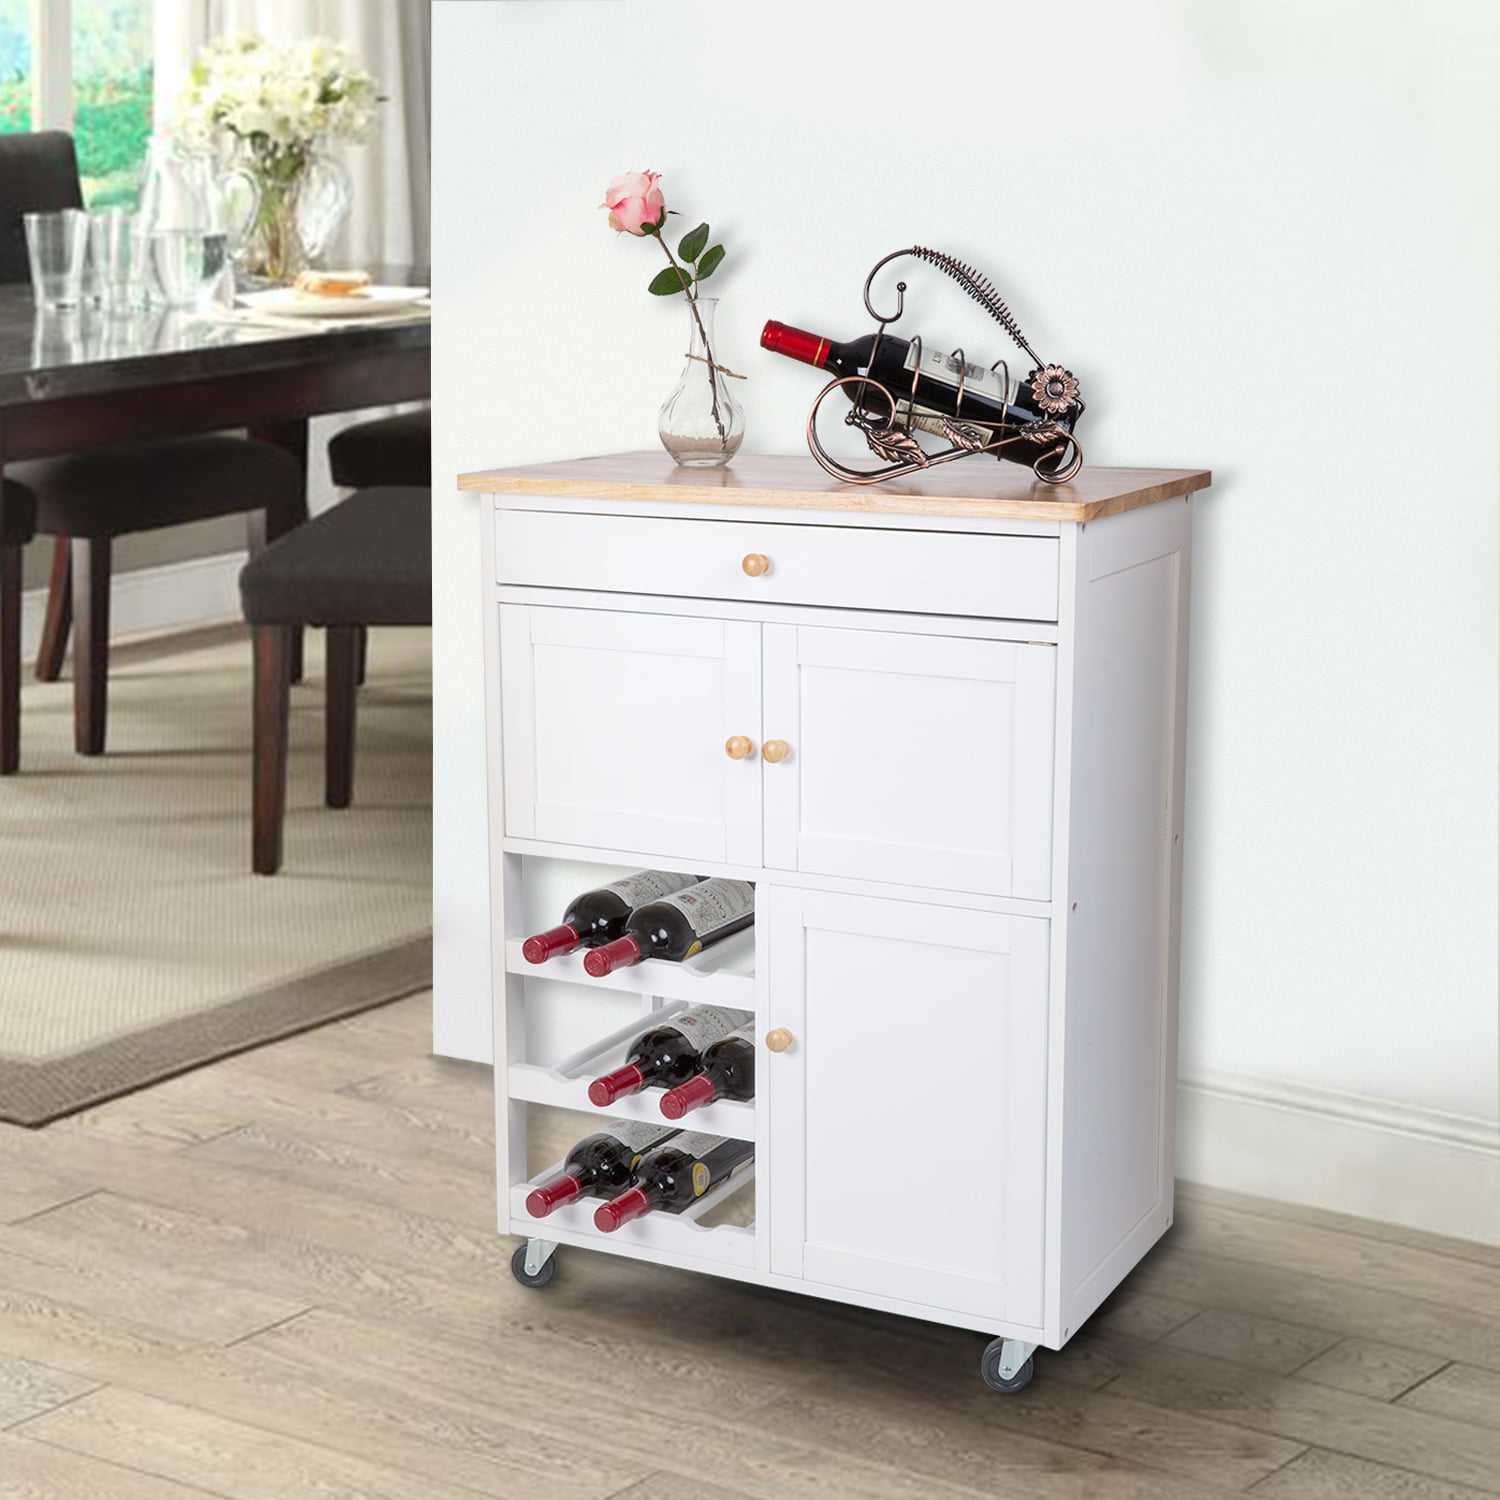 White /& Wood Color Multi-Purpose Wood Rolling Wood Kitchen Island Trolley Cart Wood Top Storage Cabinet Utility